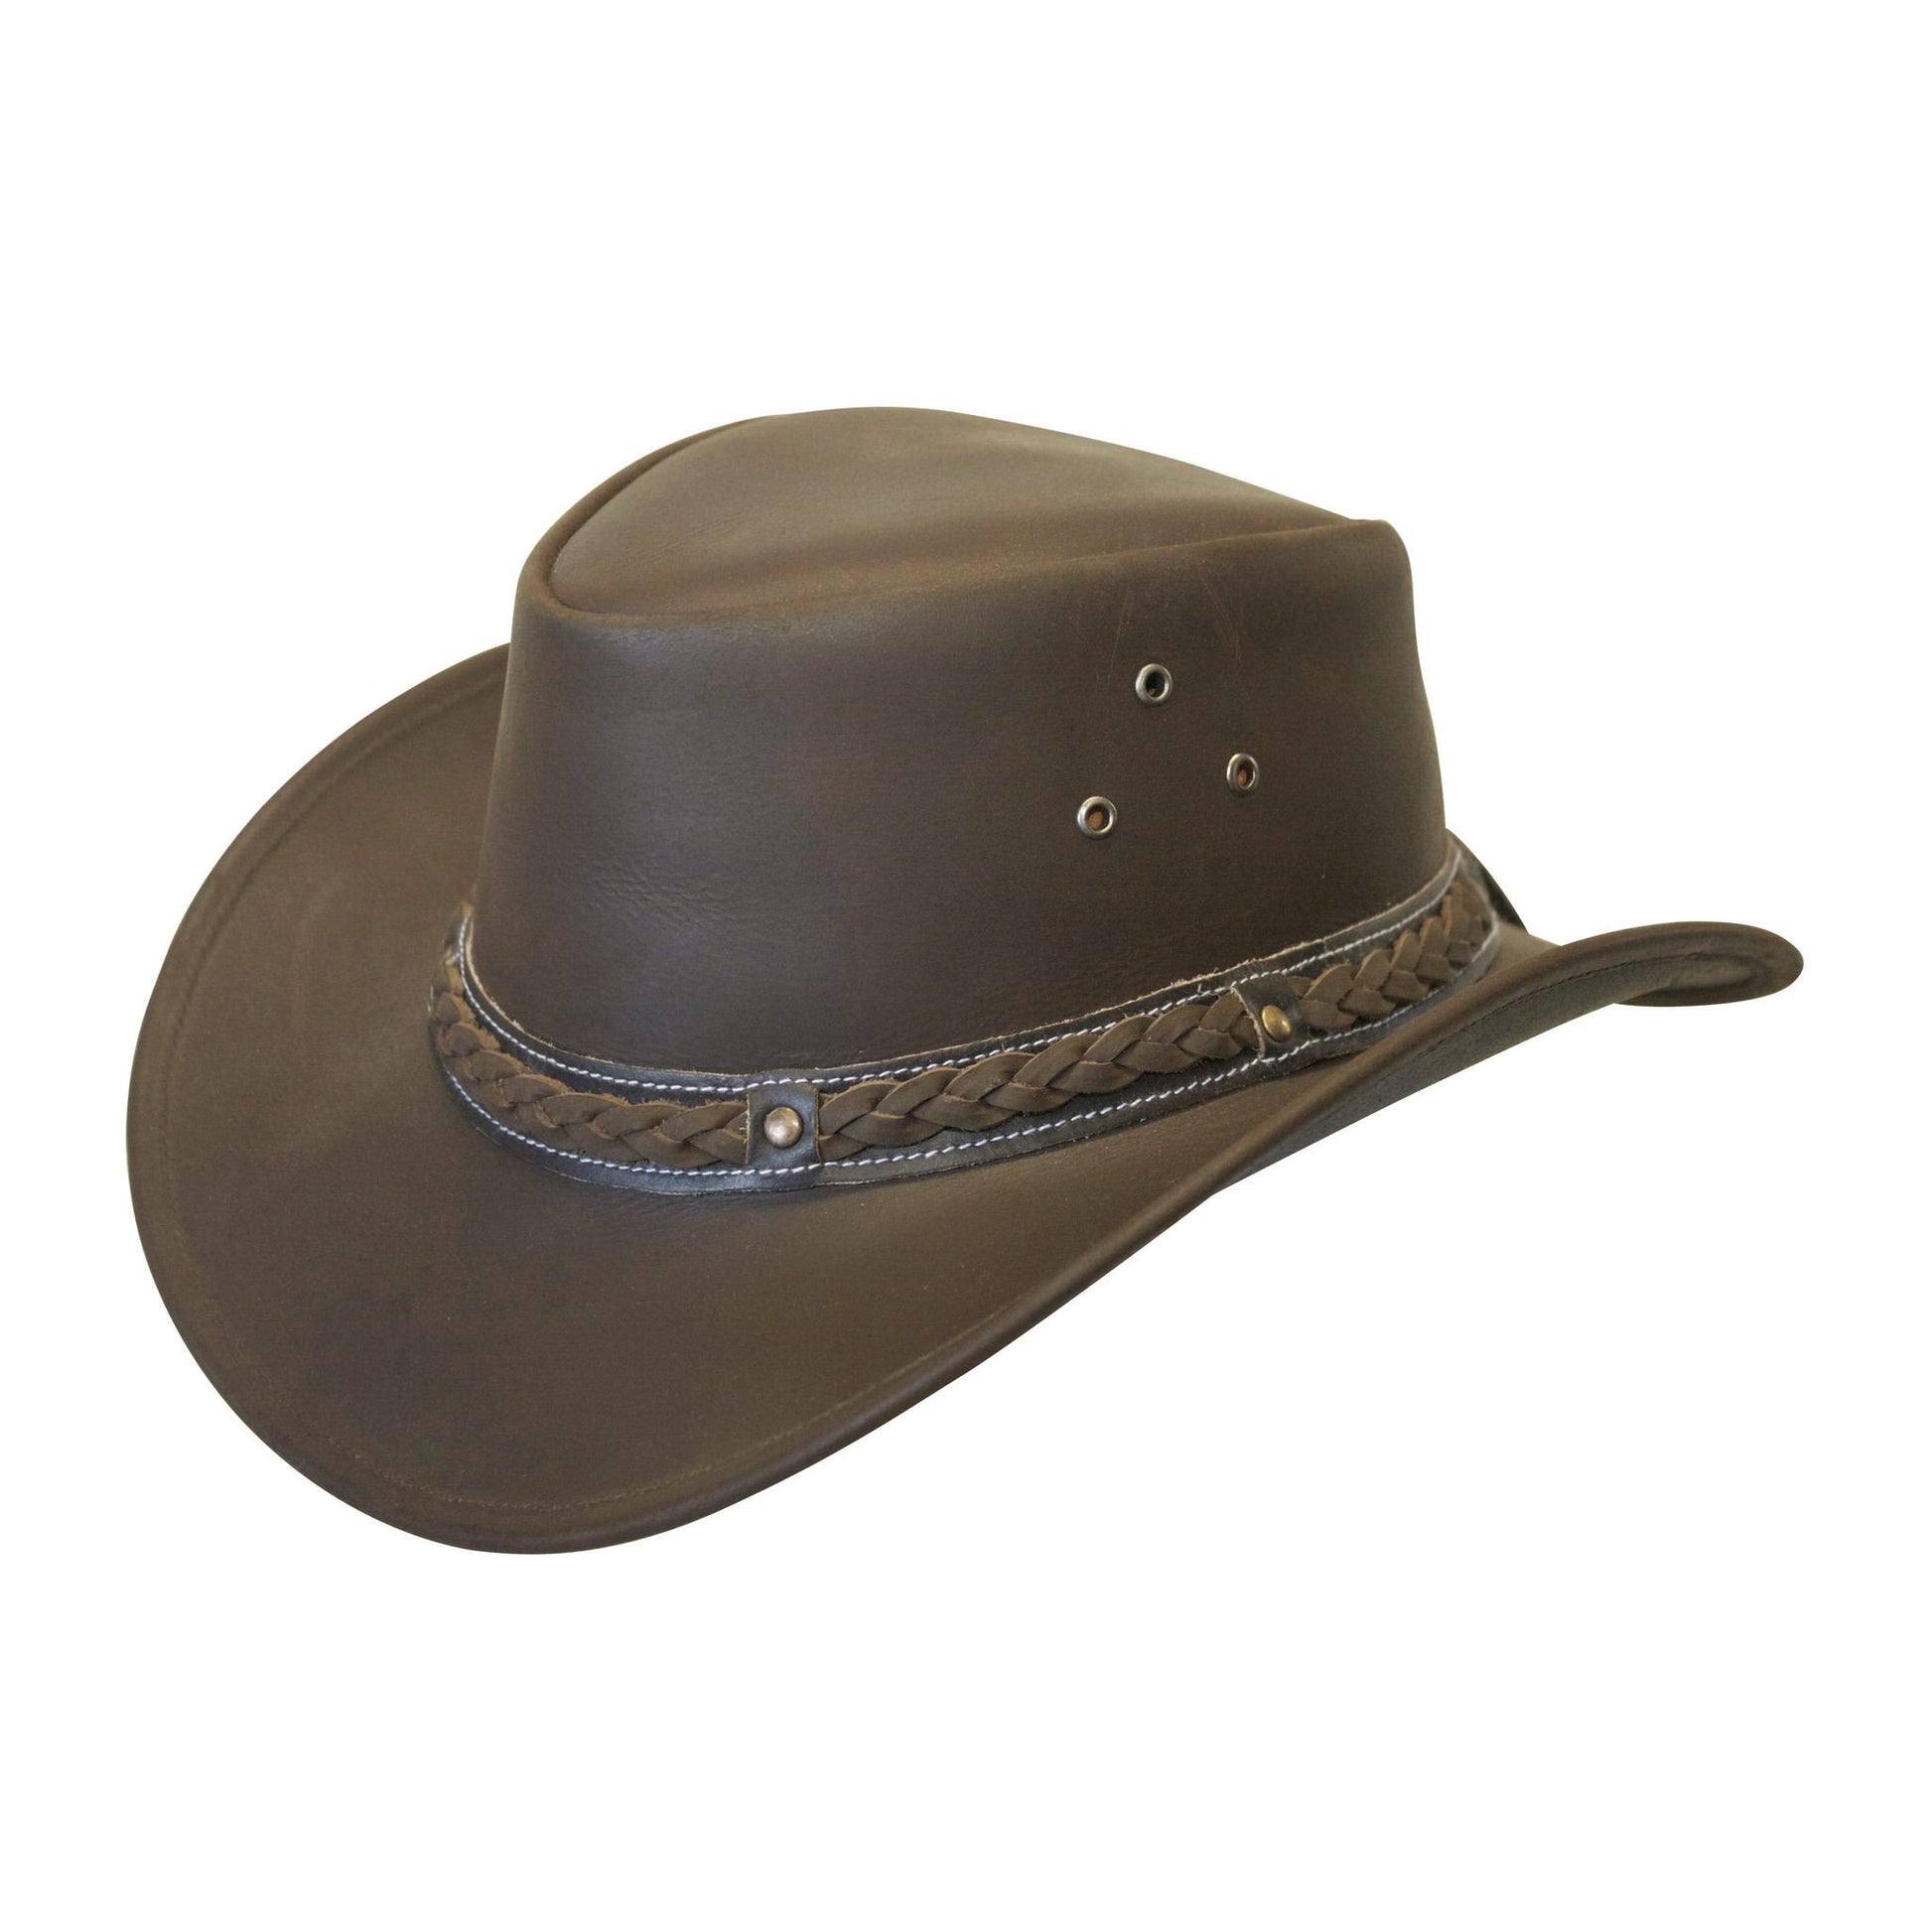 Conner Hats Down Under Leather Hat - Brown A1001-10